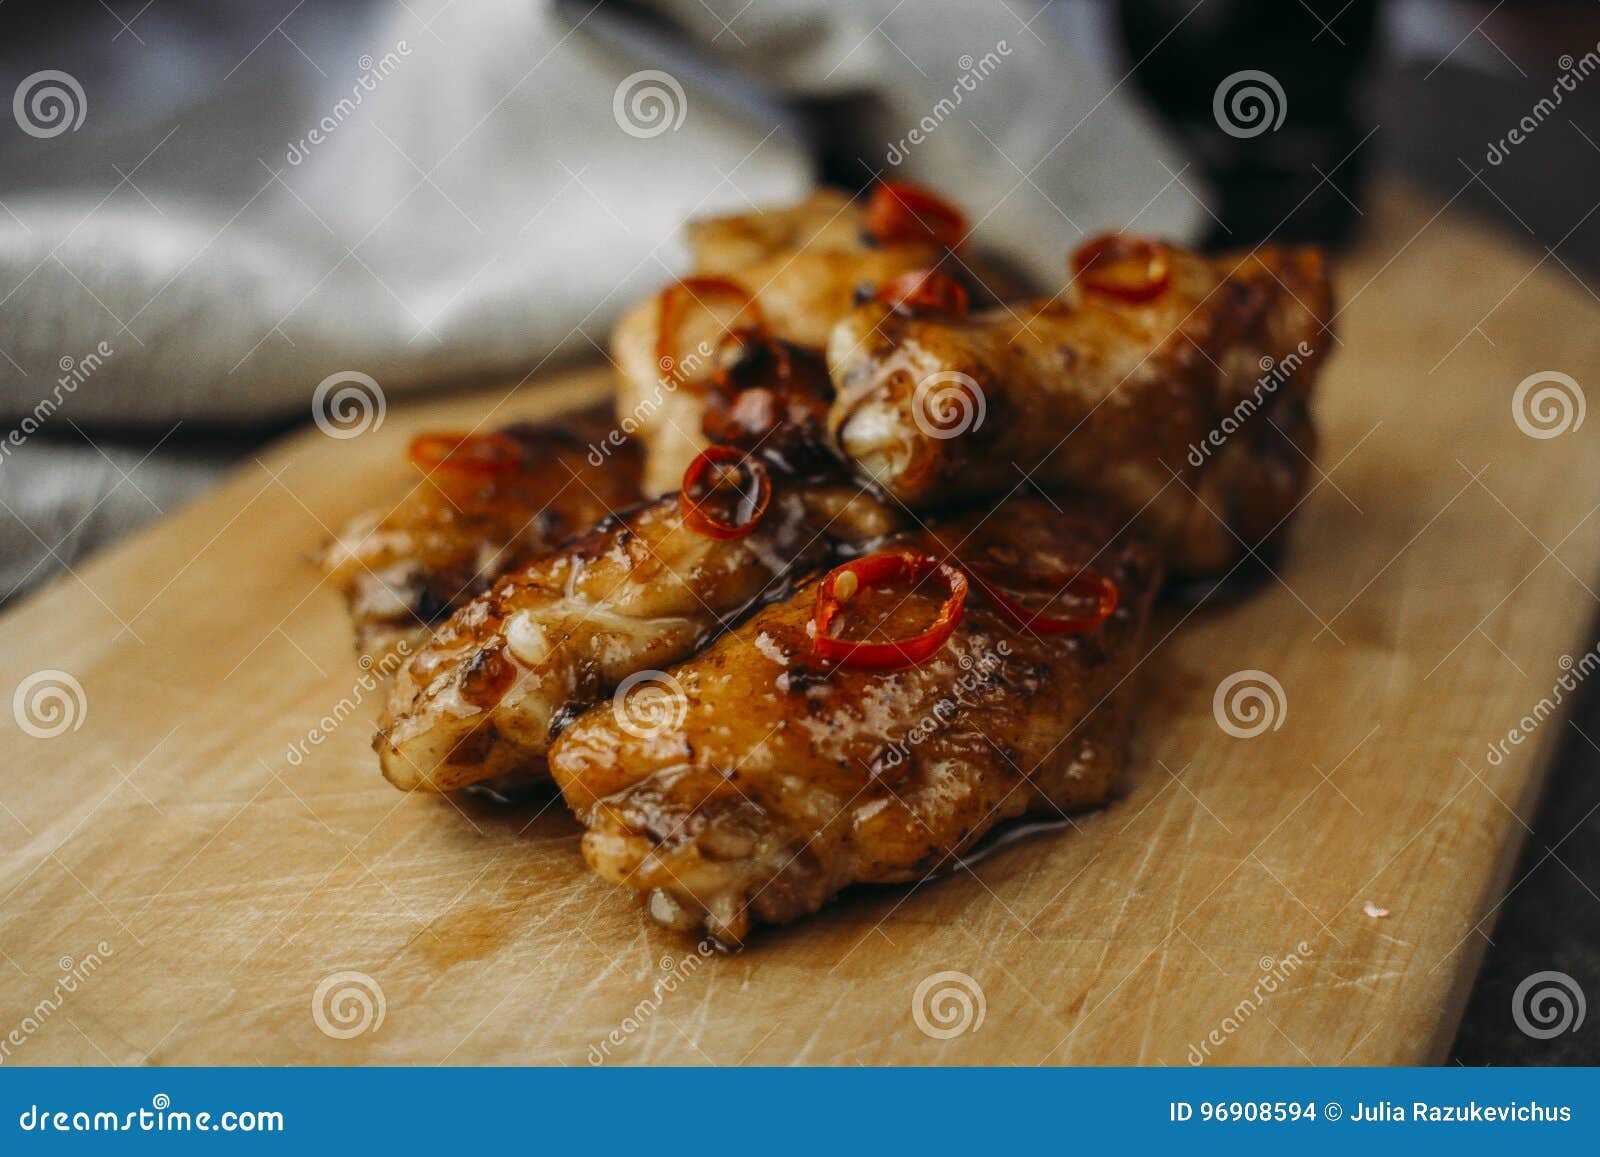 Chicken glazed with chili stock photo. Image of asian - 96908594